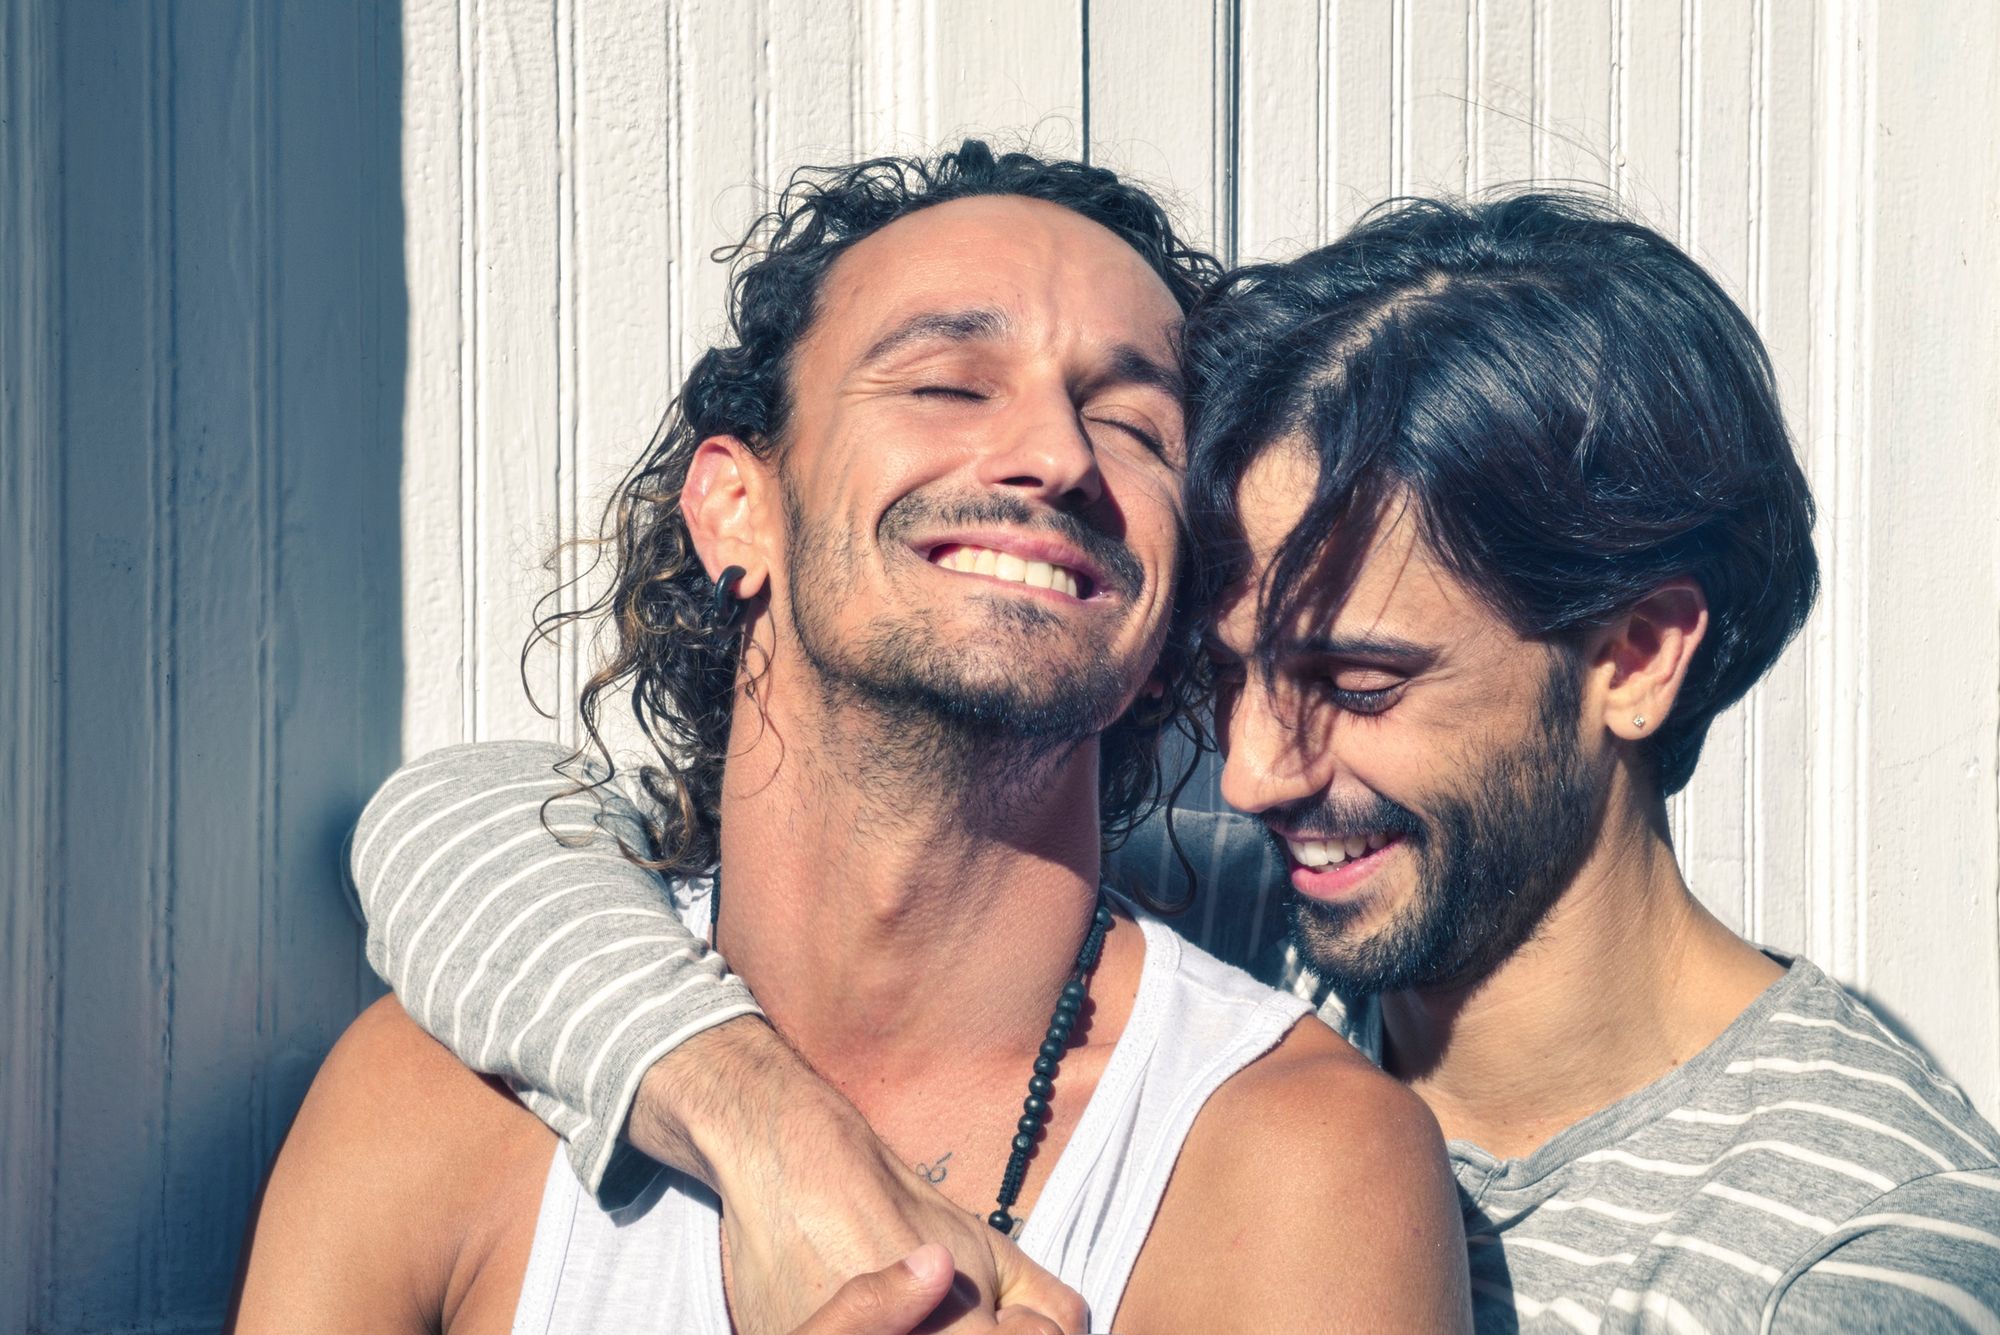 A gay couple embrace each other, smiling in the sun